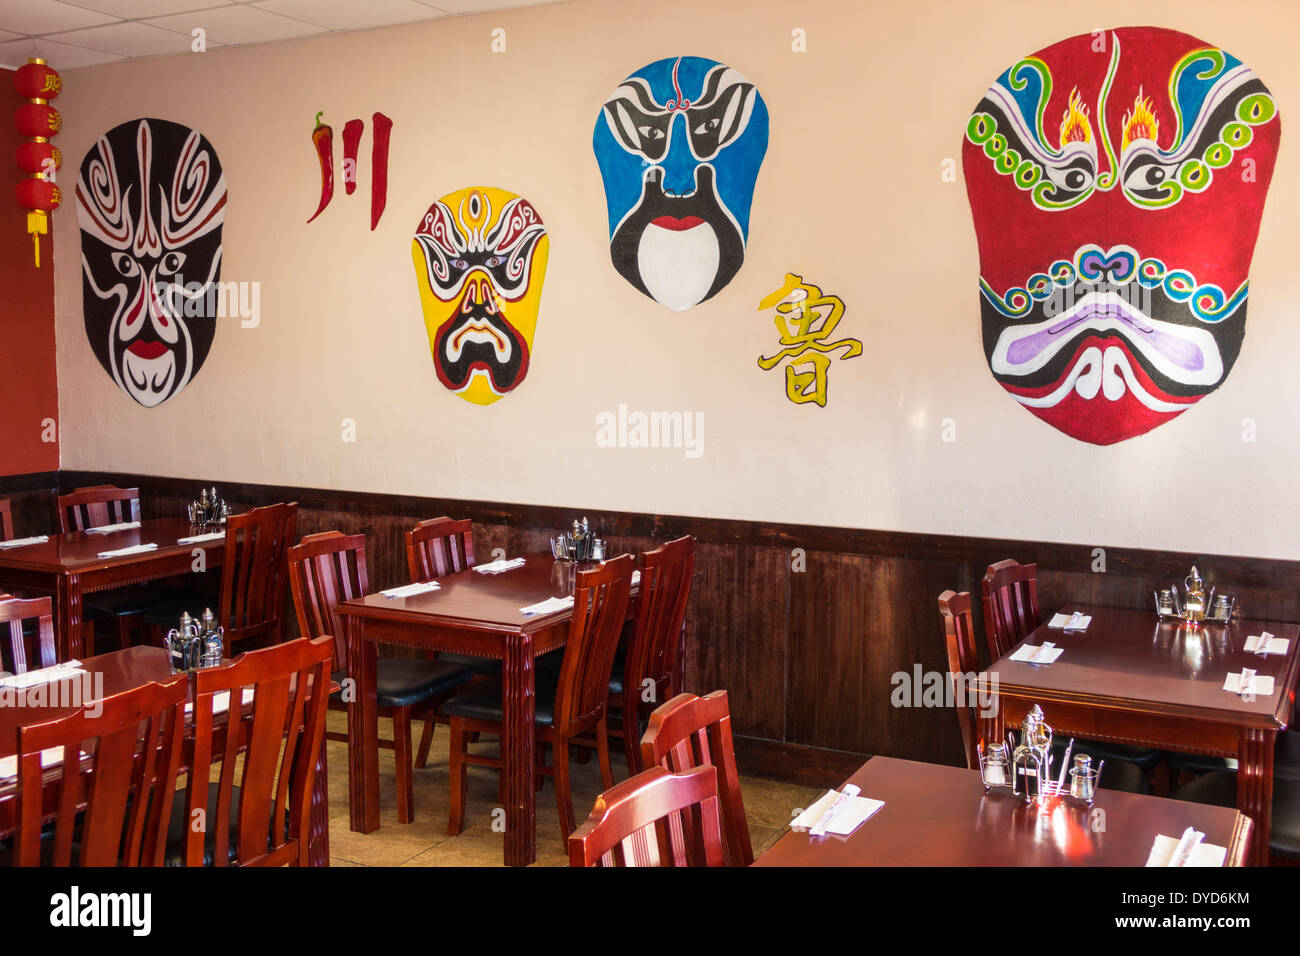 Orlando Florida,East Colonial Drive,Little Saigon,Asian cuisine,restaurant restaurants food dining eating out cafe cafes bistro,interior inside,face m Stock Photo